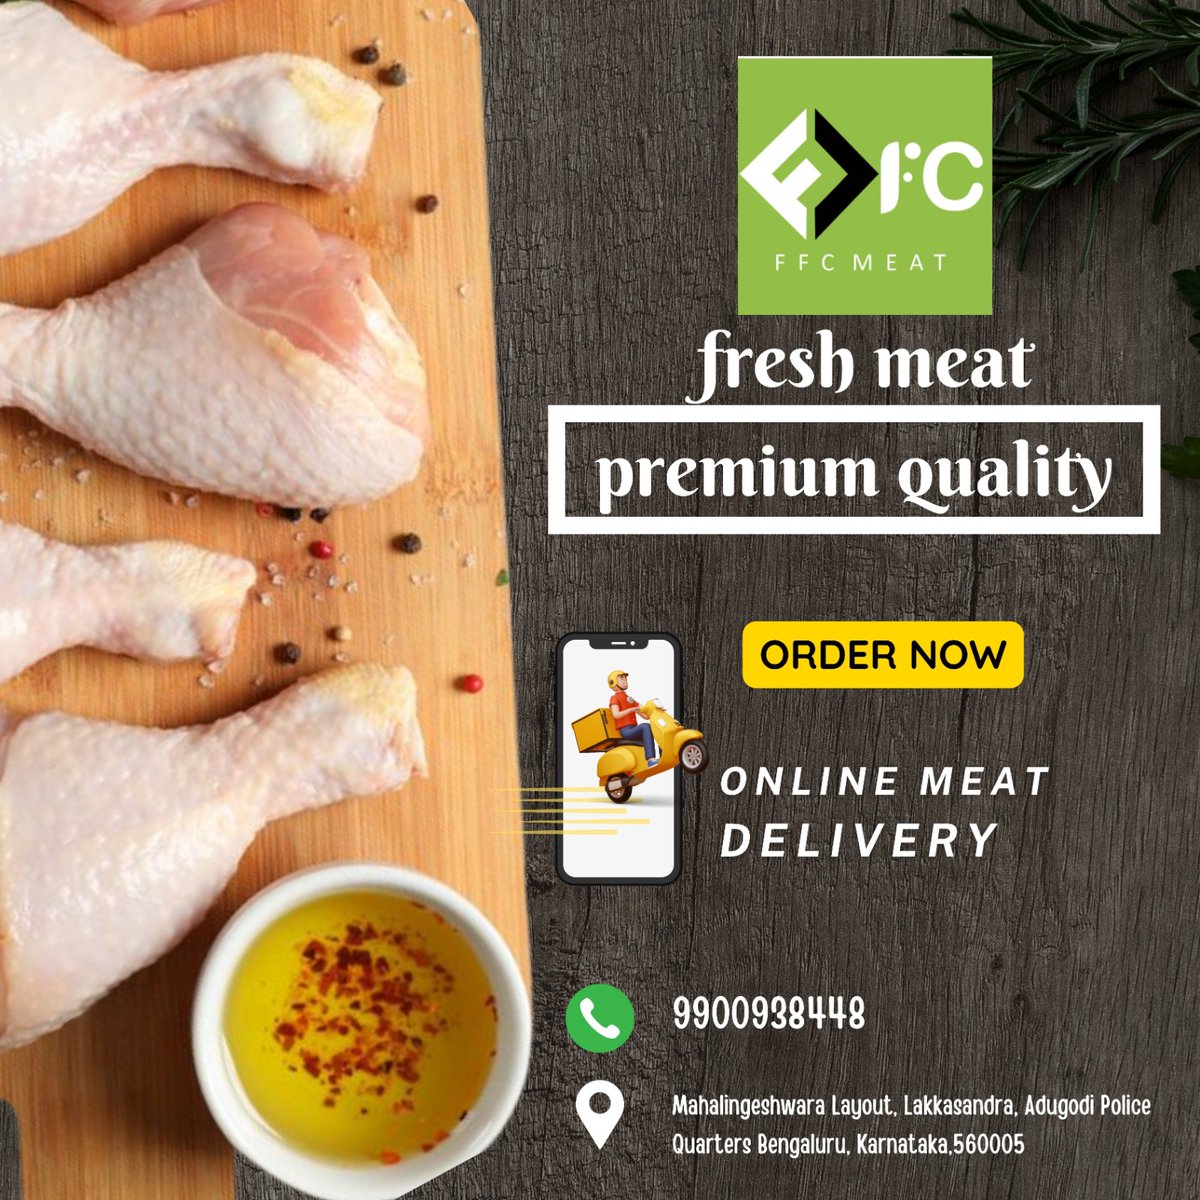 🍗 Calling all food enthusiasts! 🍗

#FreshChicken #CulinaryAdventure #FoodEnthusiast #FarmToTable #PremiumQuality #CookingInspiration #DeliciousDishes #ElevateYourCooking